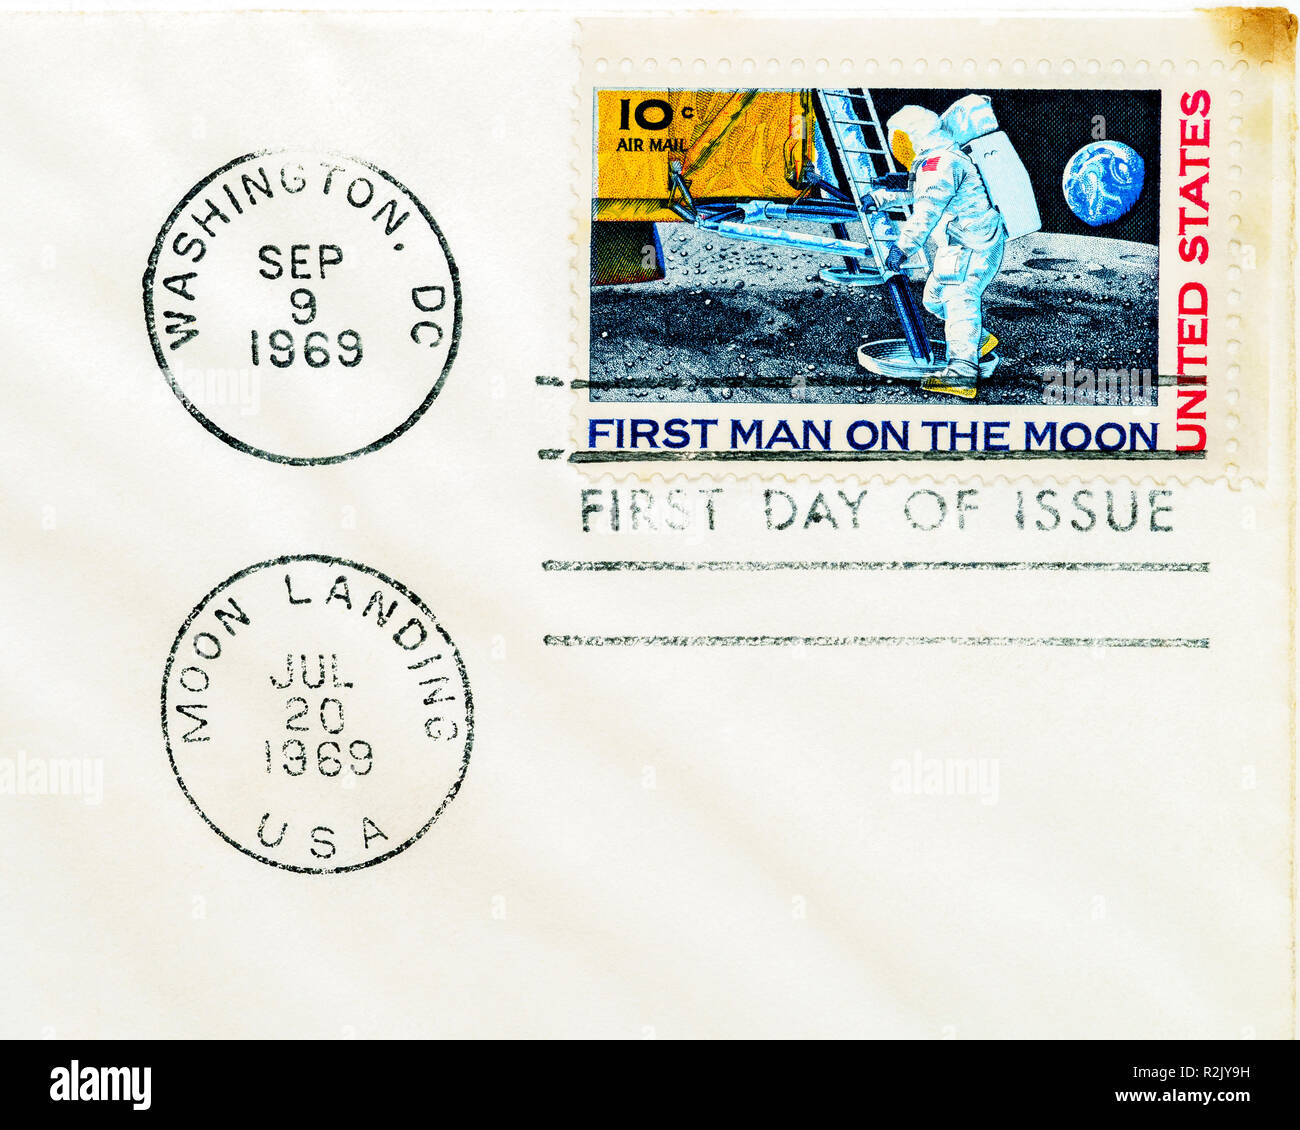 1969 first moon landing commemorative stamp on first day of tissue envelope Stock Photo